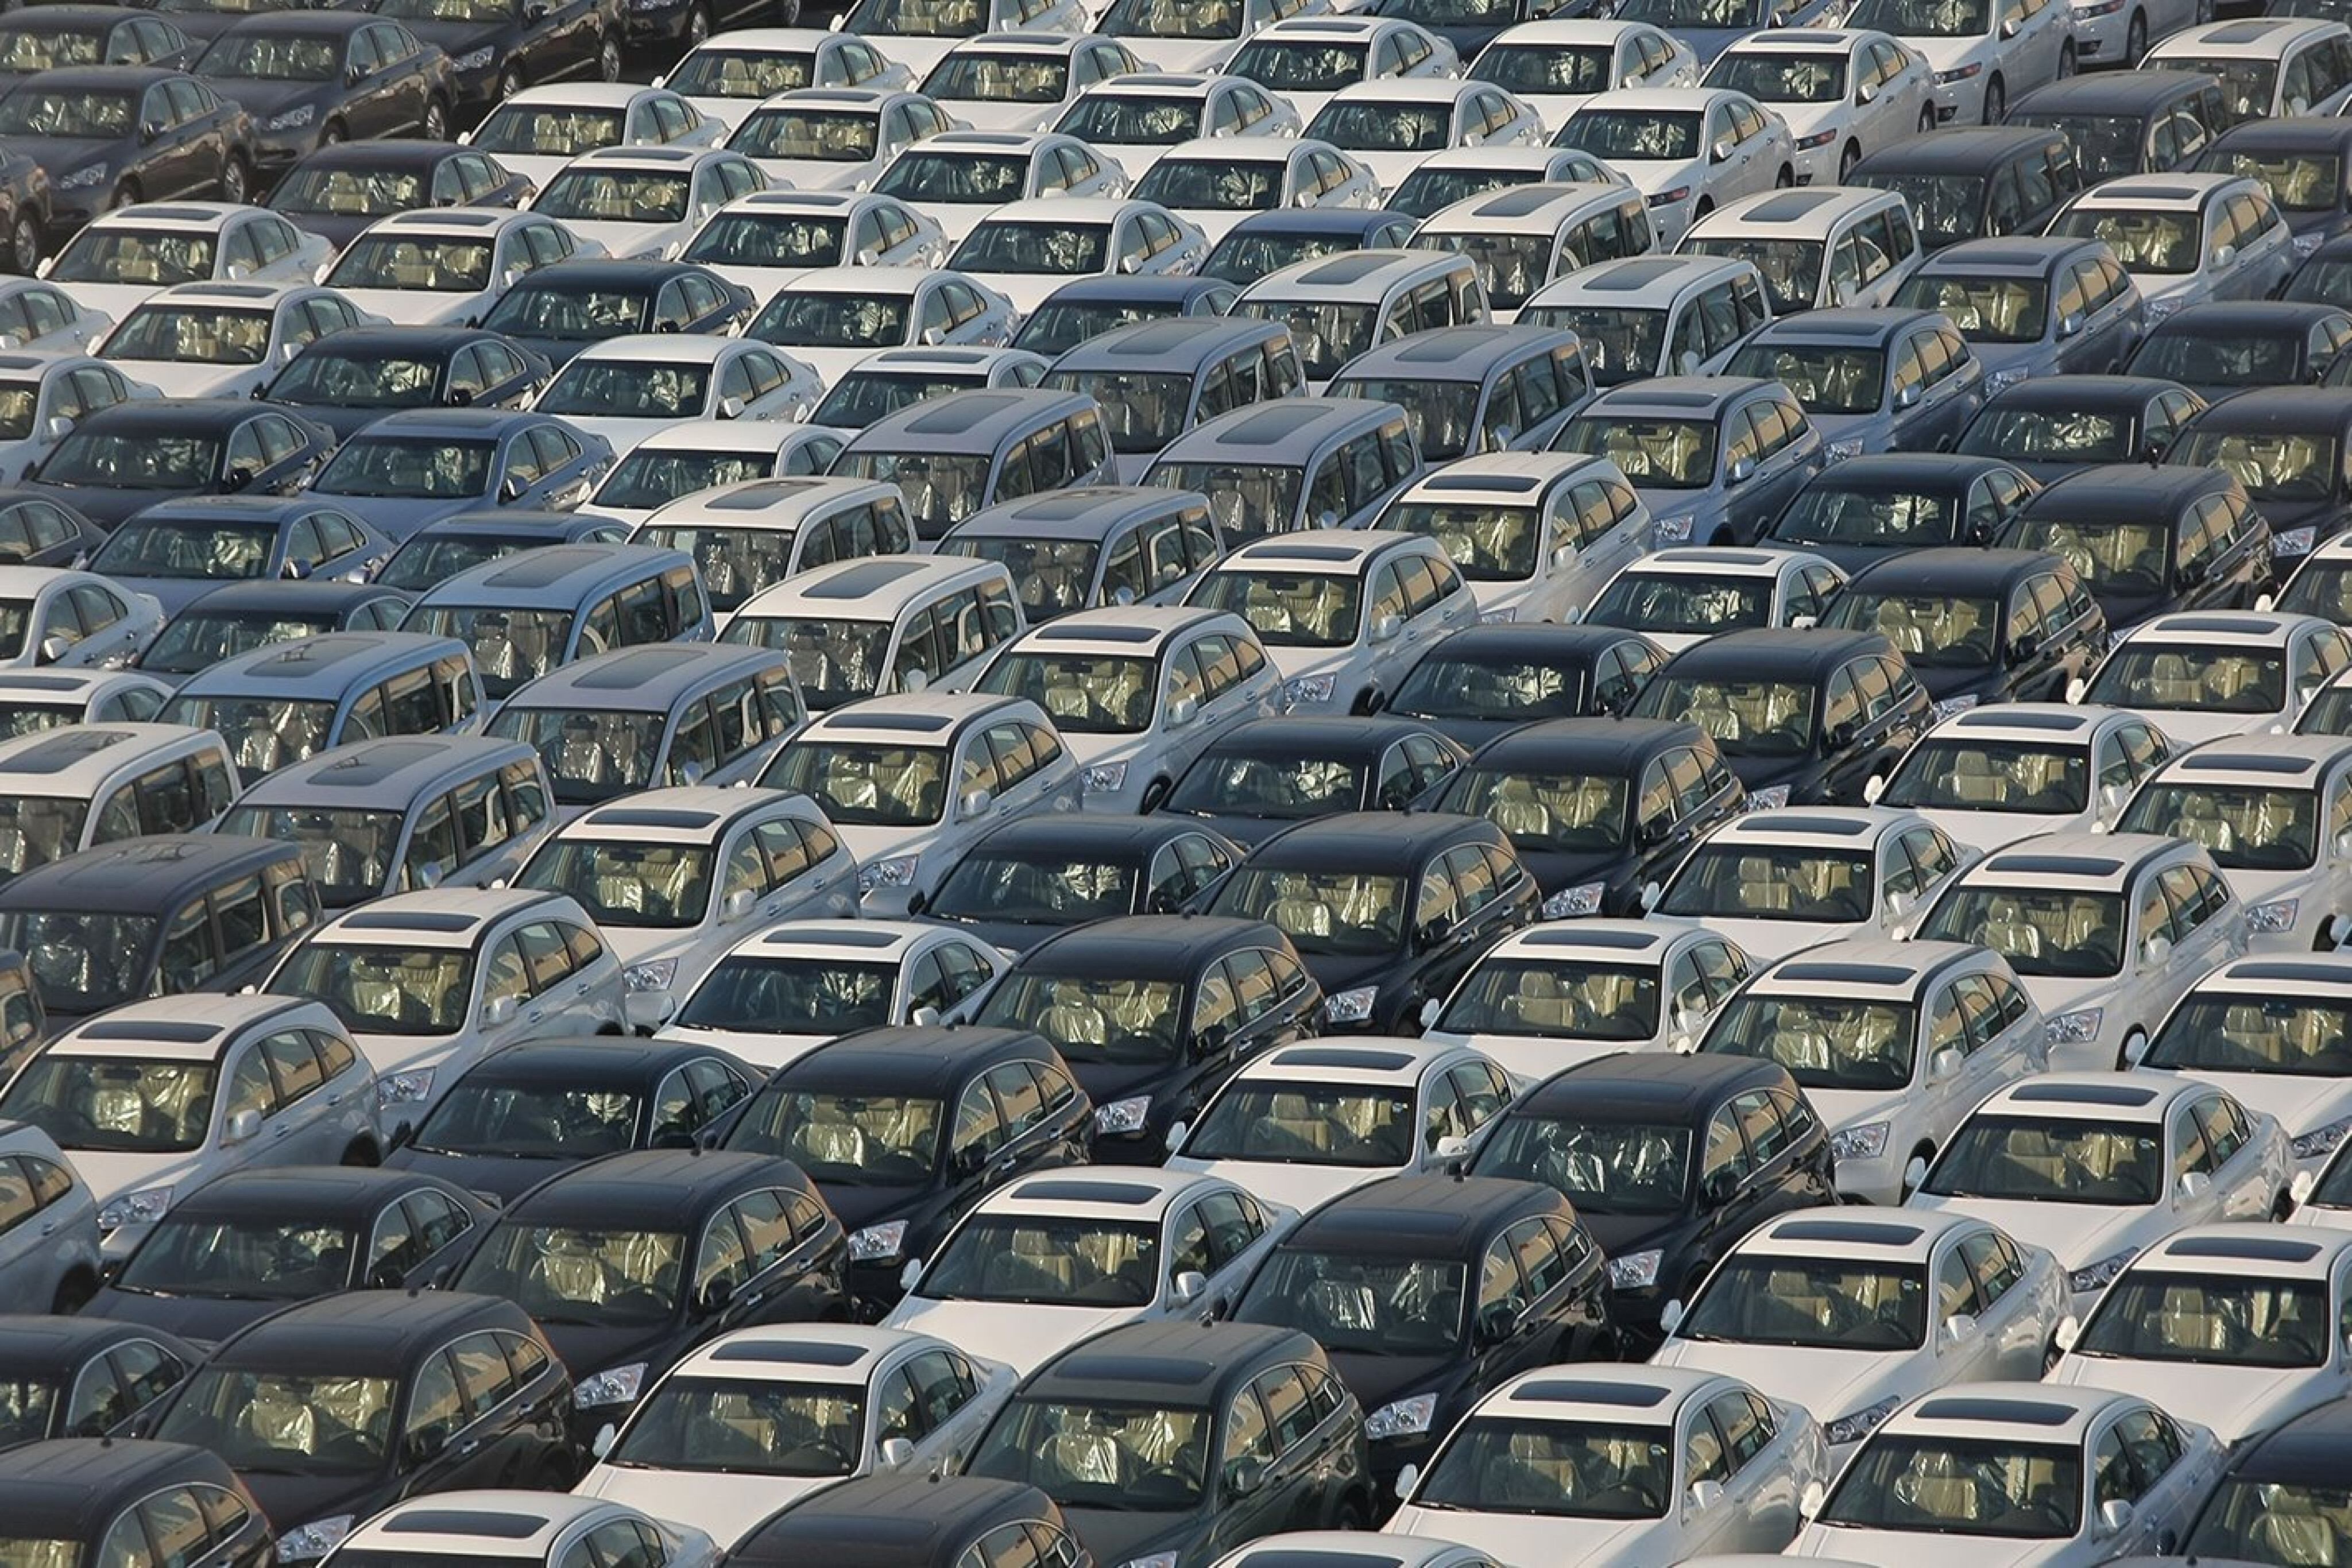 b98d0a67/cars queued up for shipping jpg